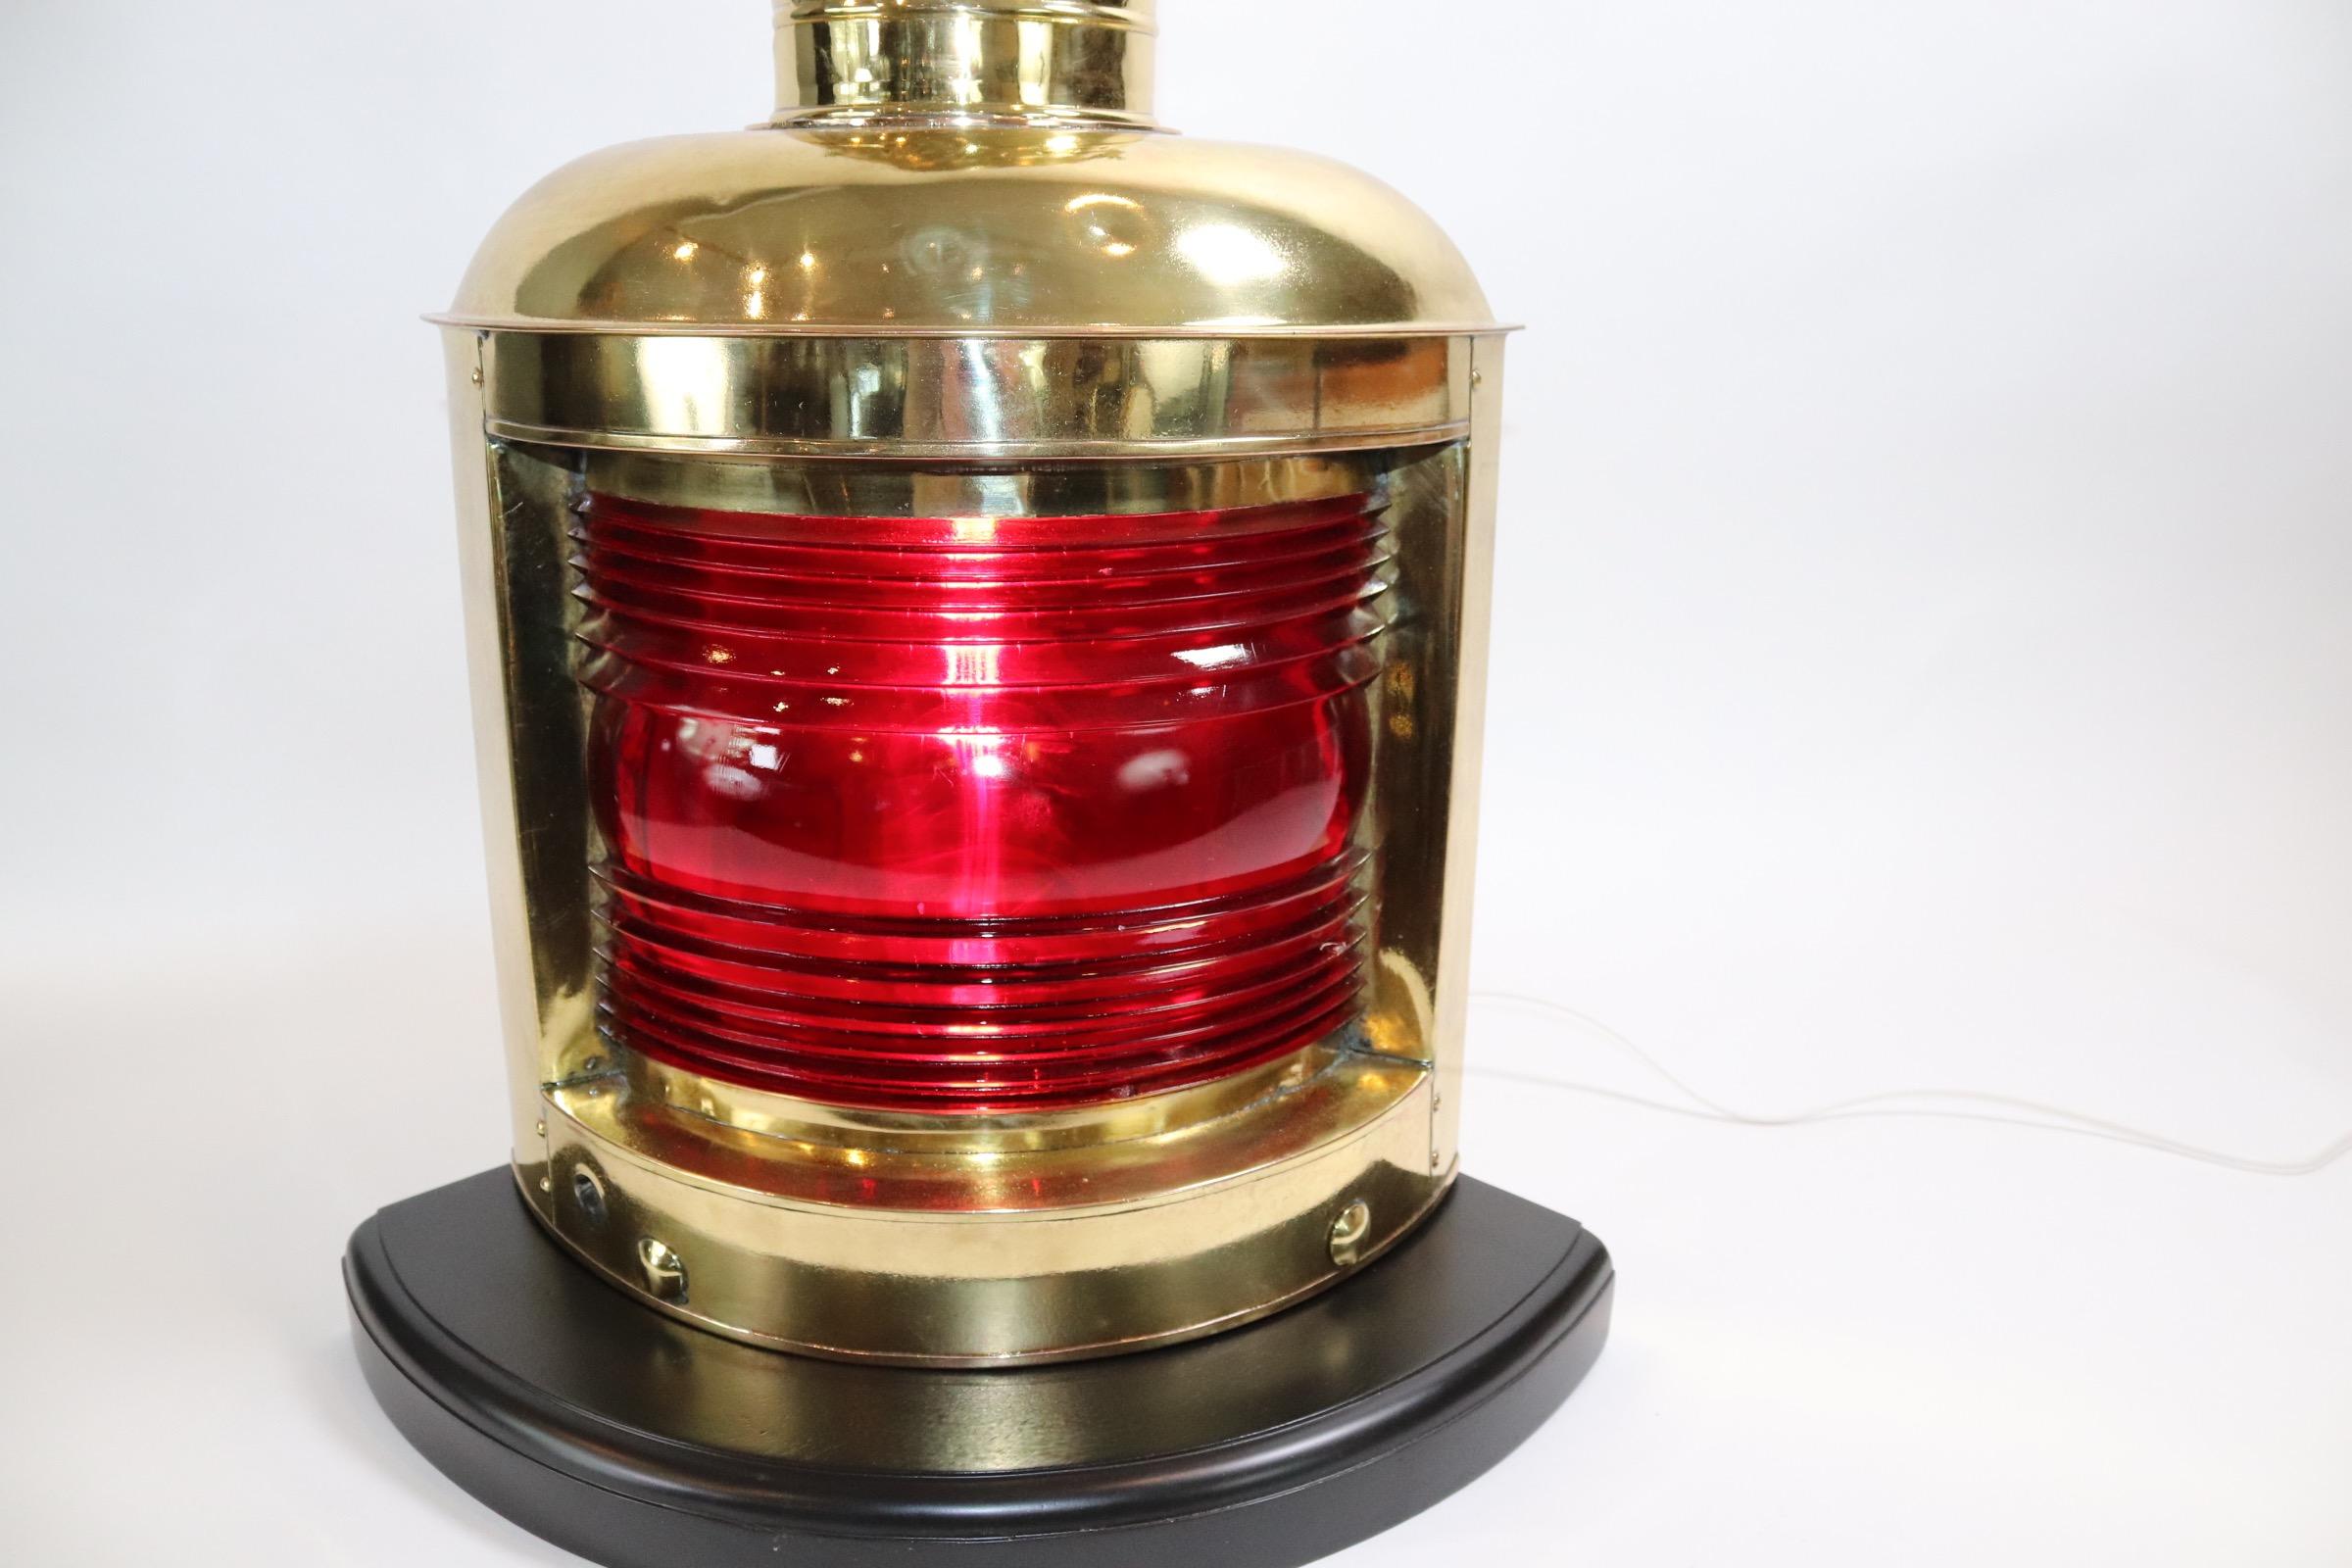 Brass ships port lantern with highly polished and lacquered finish. Lantern has been mounted to a thick wood base with rich dark finish and has been wired for home use. Beautiful dark rich lens. Weight is 20 pounds.